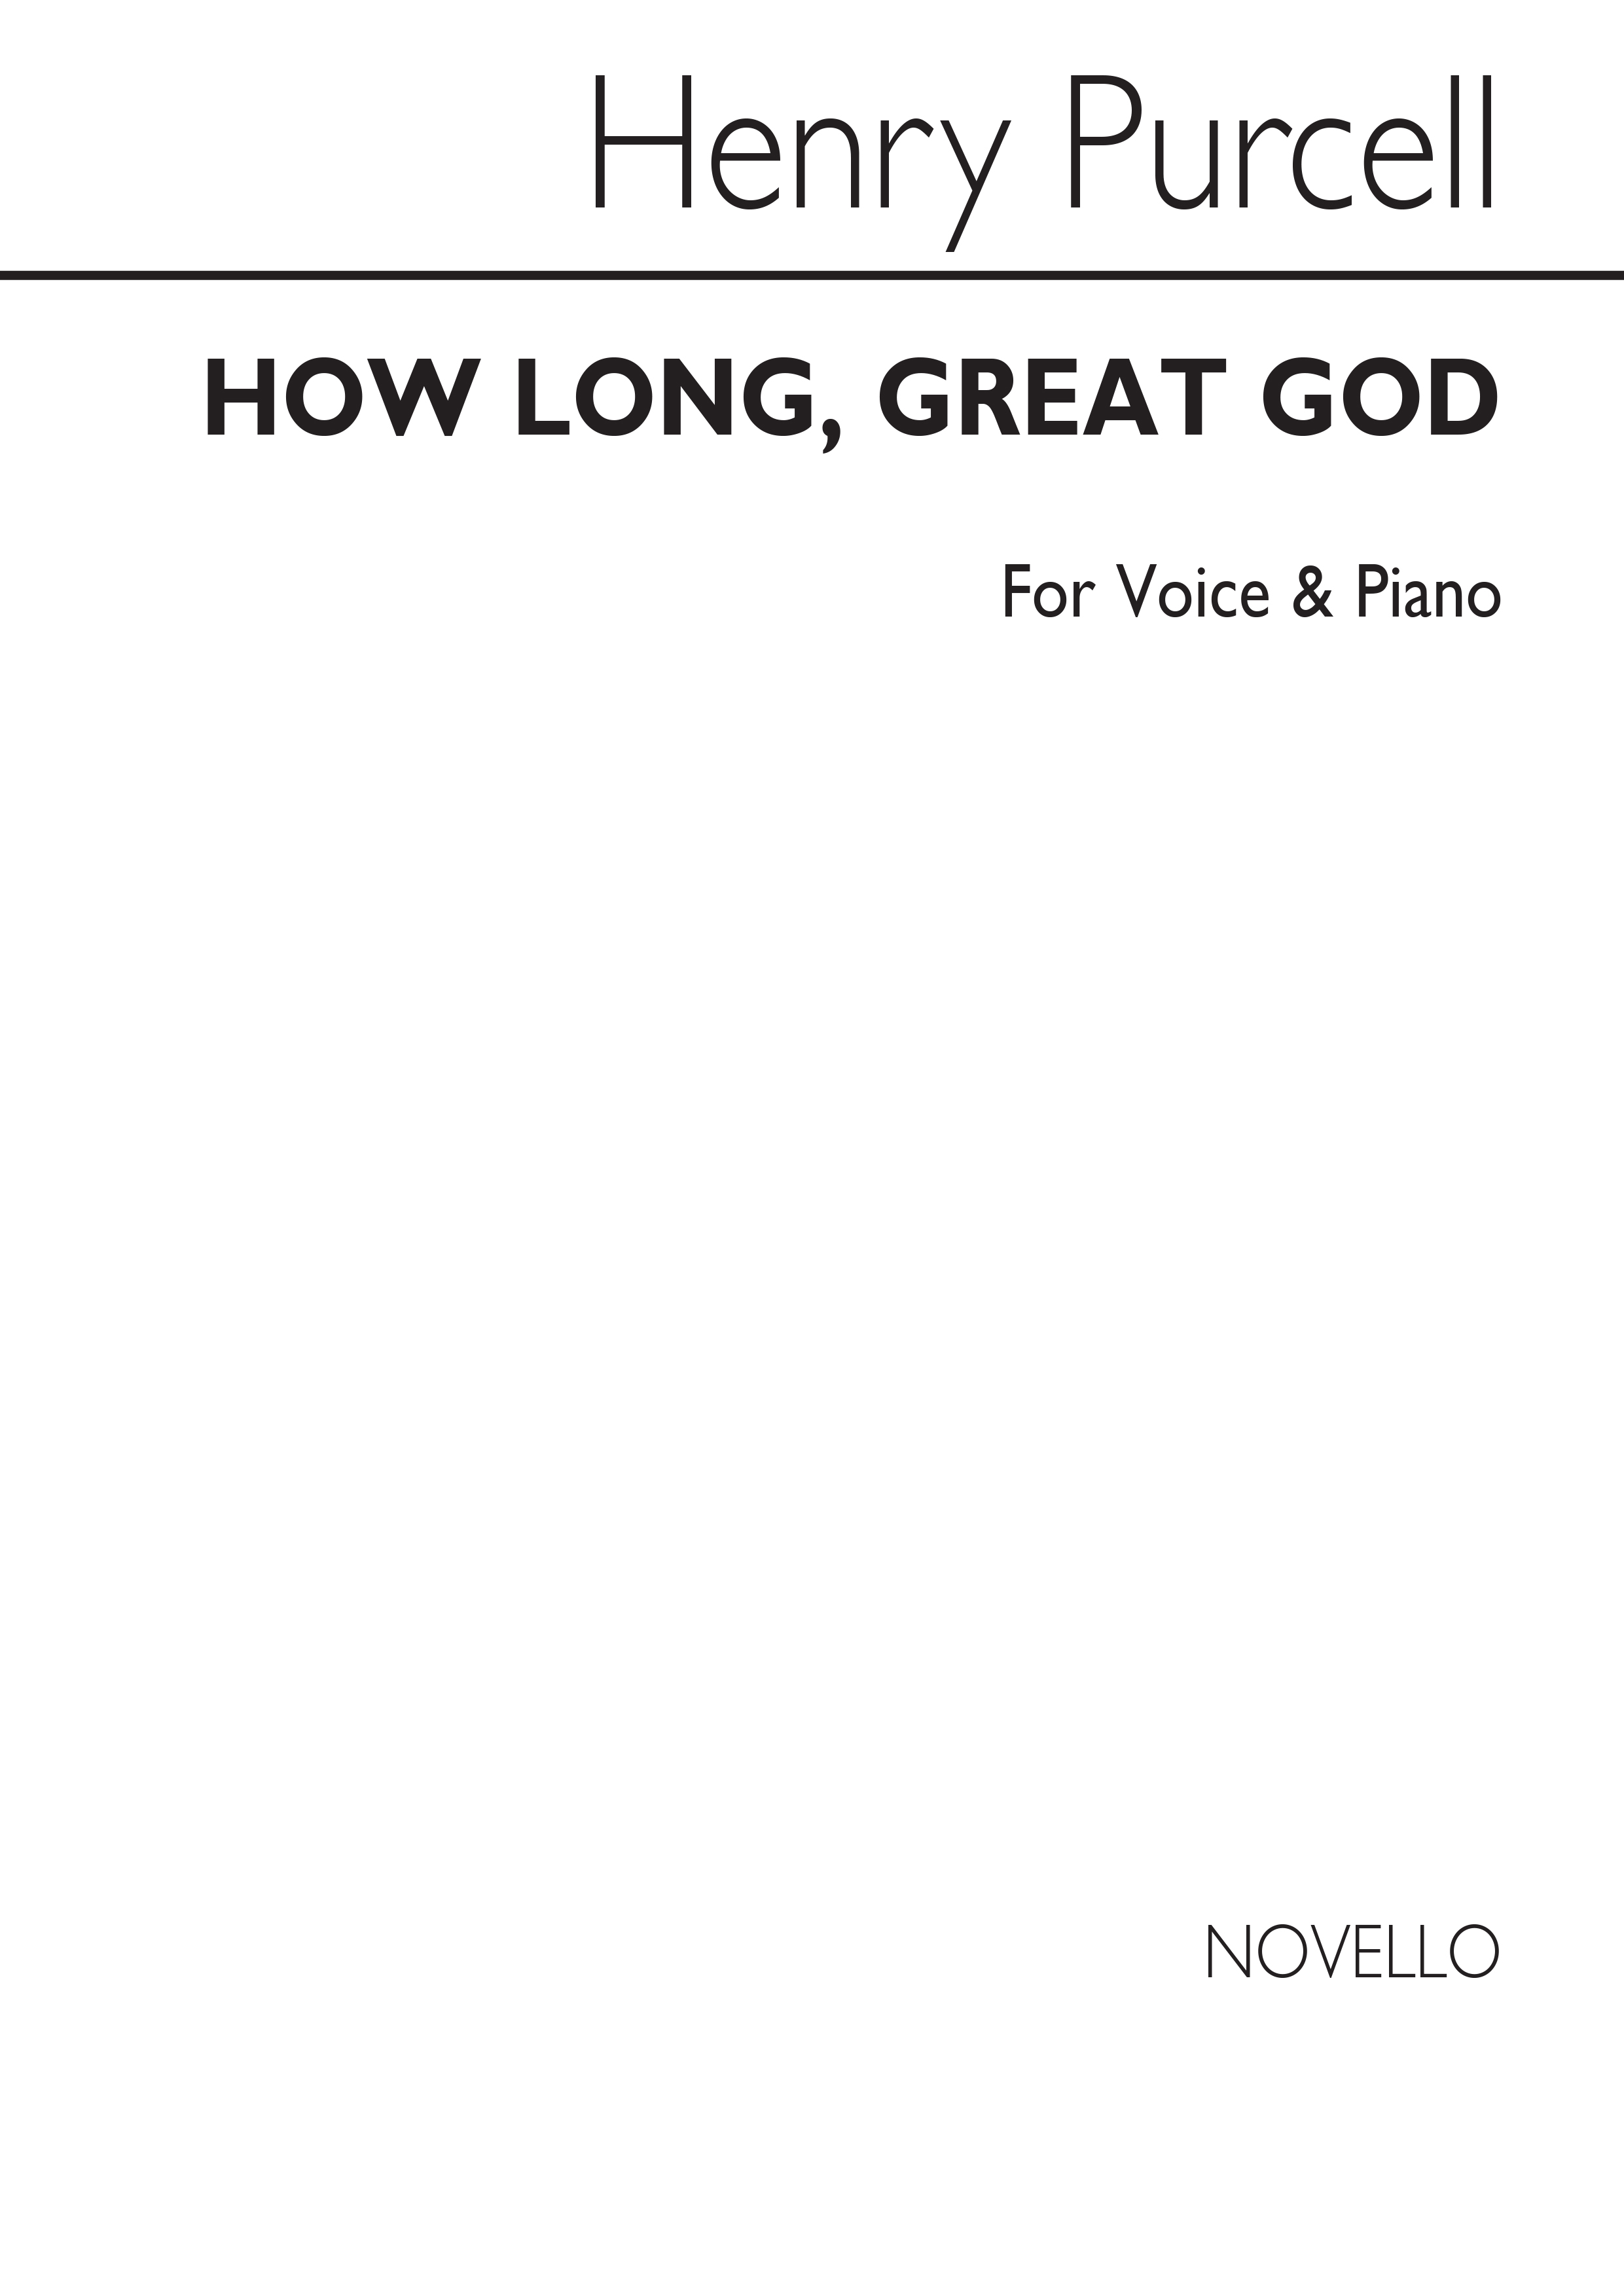 Henry Purcell: How Long Great God